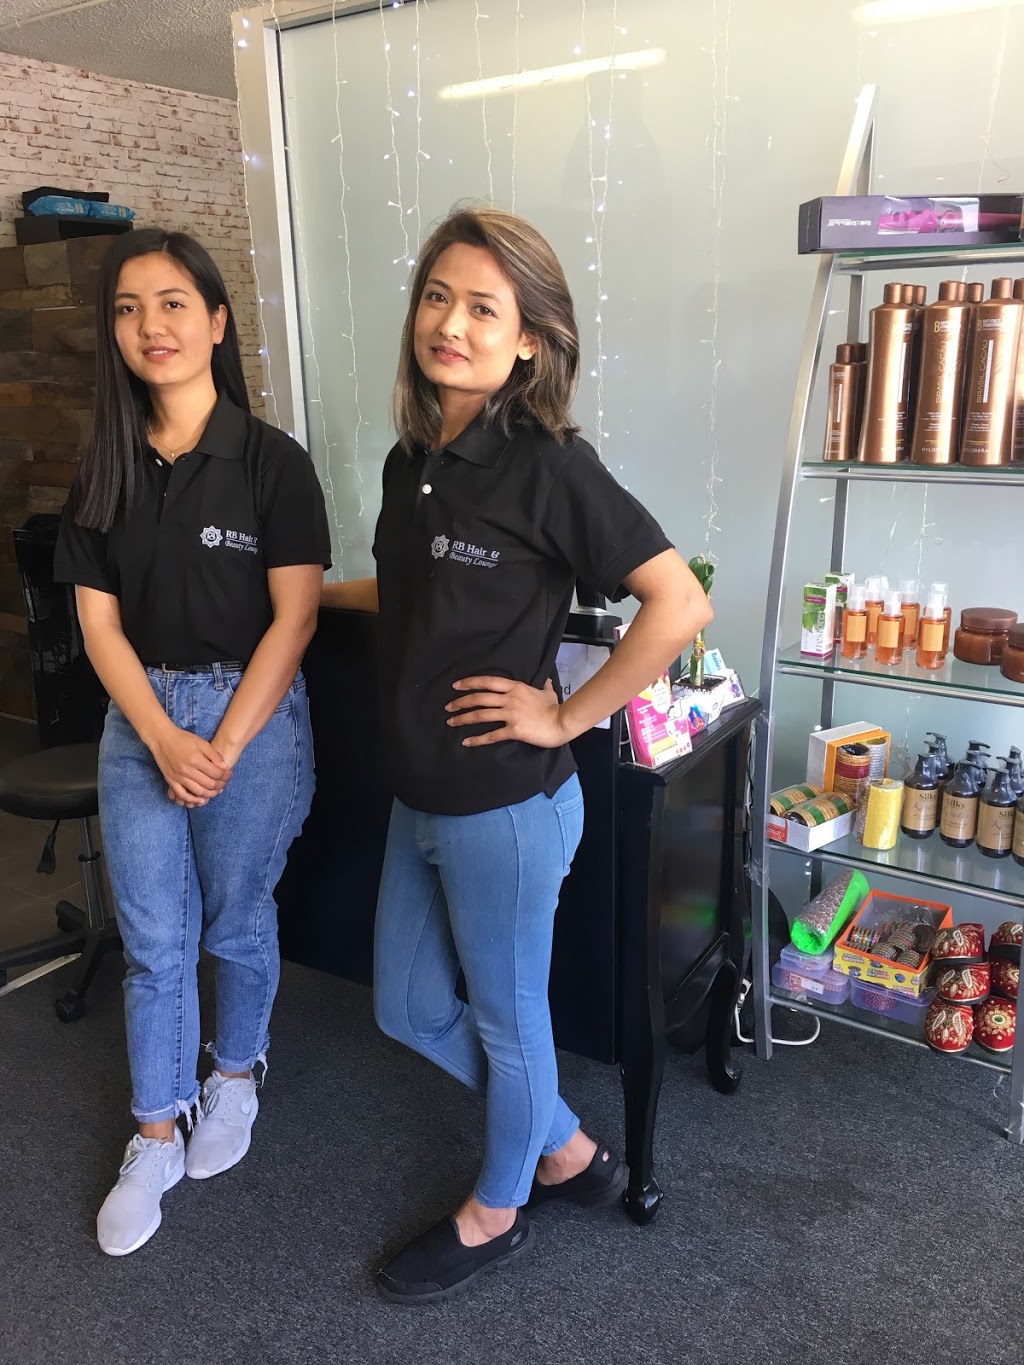 RB Hair And Beauty Lounge | Shop 3 / 46 Morts Road Corner Of Morts Road And Victoria Avenue Infront Of IGA Car Park, Mortdale NSW 2223, Australia | Phone: (02) 8065 4661